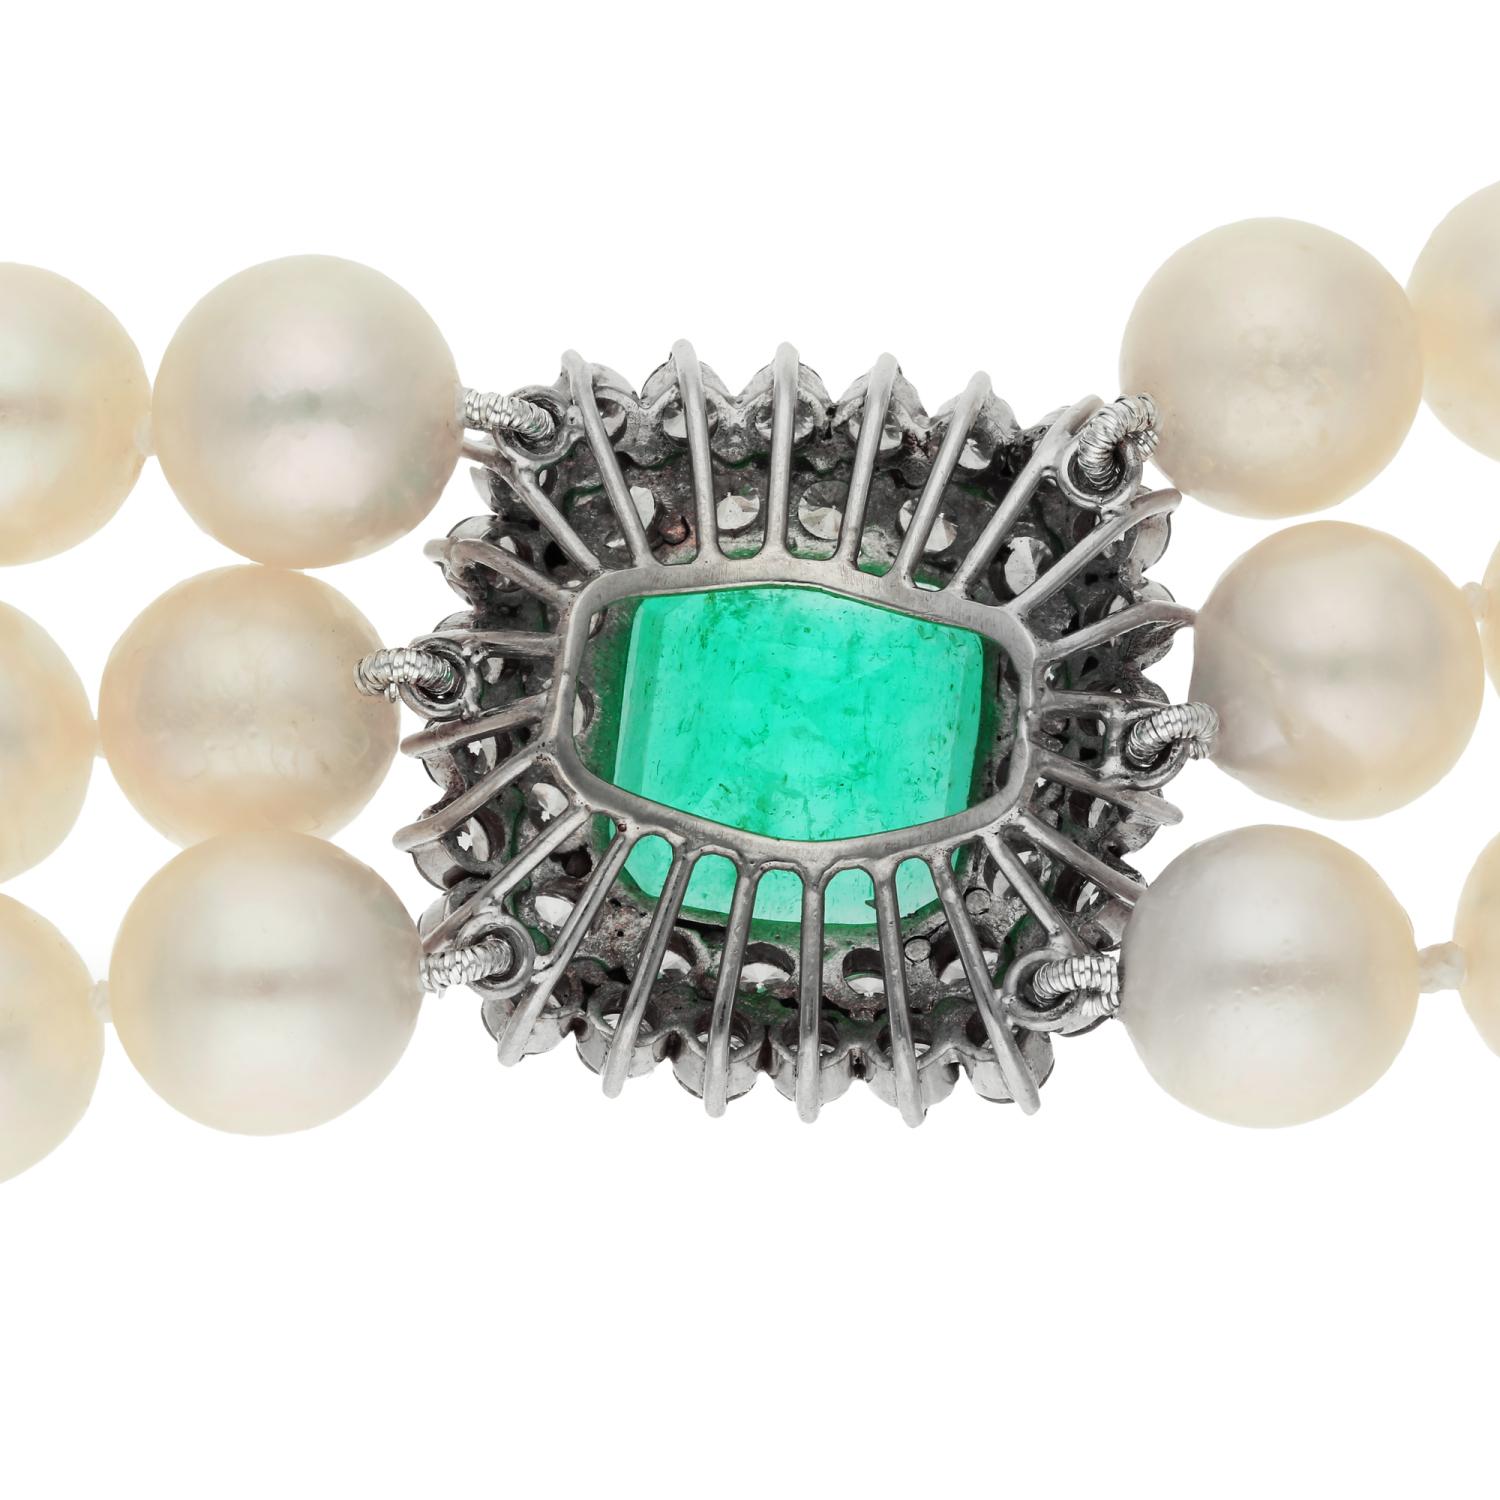 Modern 18ct White Gold 9ct Emerald, 2.8ct Diamond & Cultured Pearl Choker Necklace For Sale